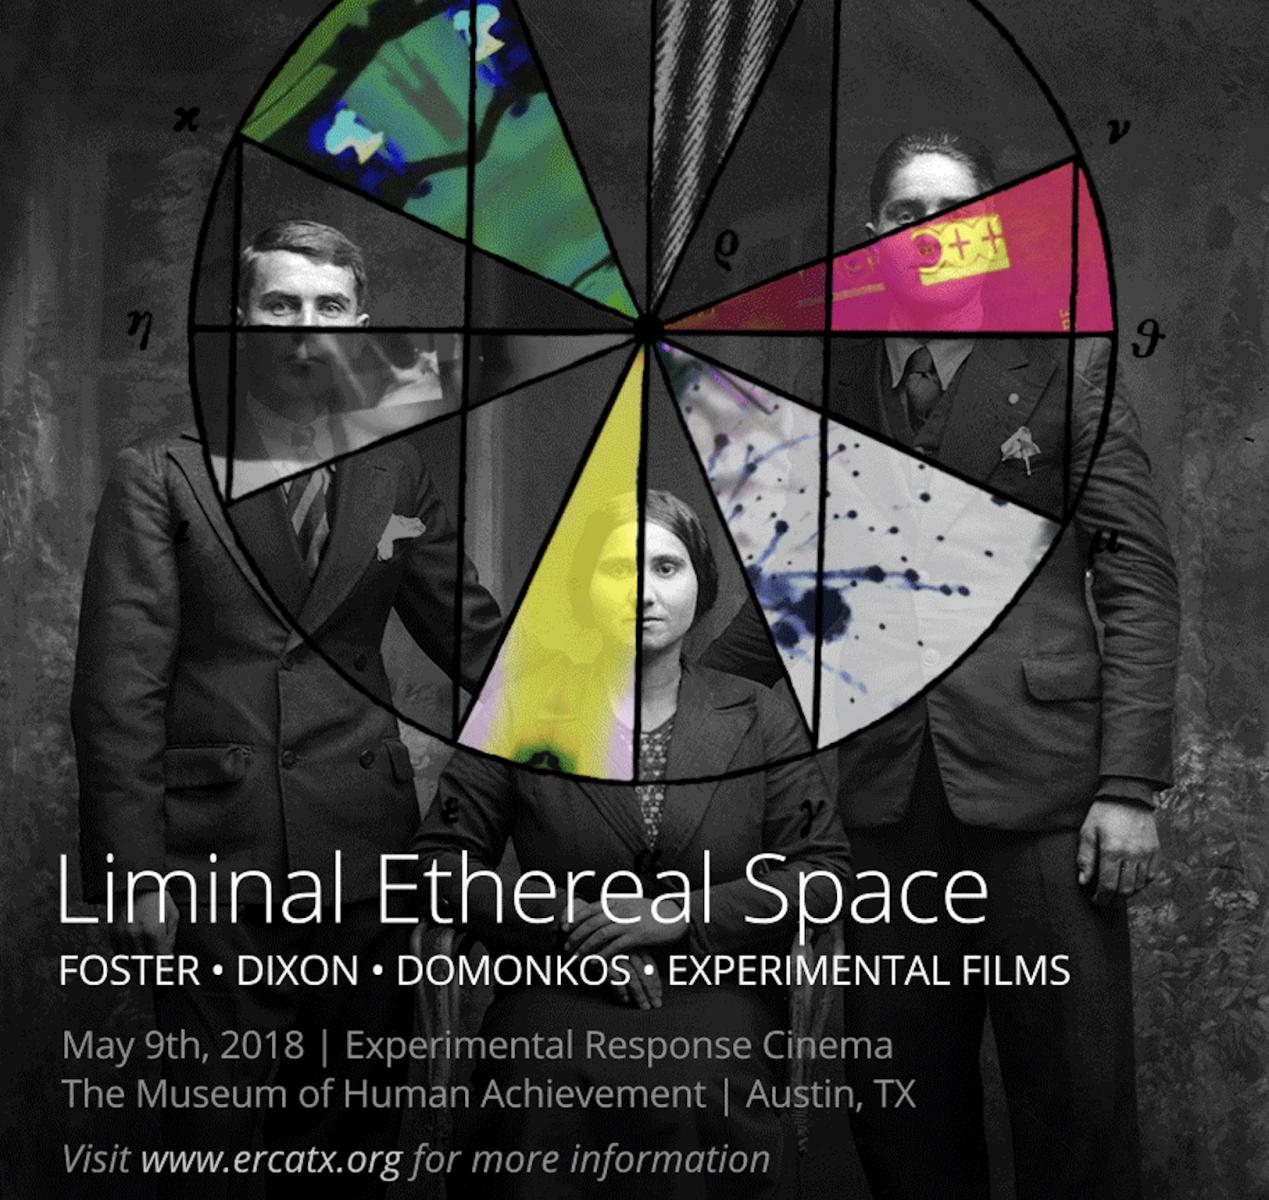 Poster for LIMINAL ETHEREAL SPACE show